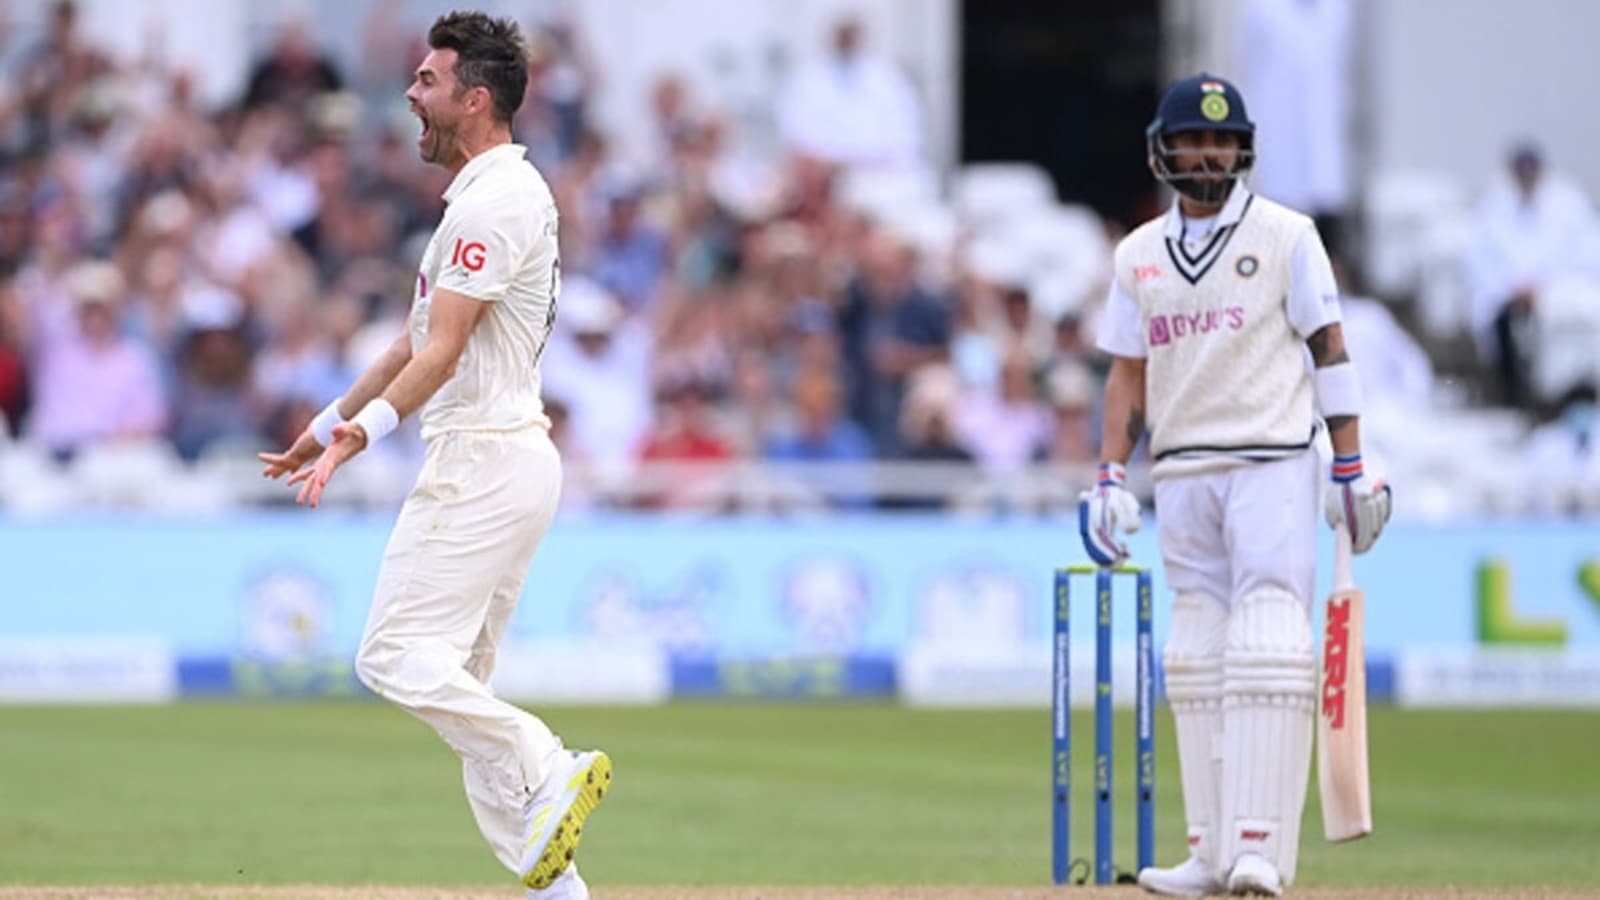 India Vs England James Anderson Dismisses Virat Kohli For First Ball Duck Watch Cricket Hindustan Times